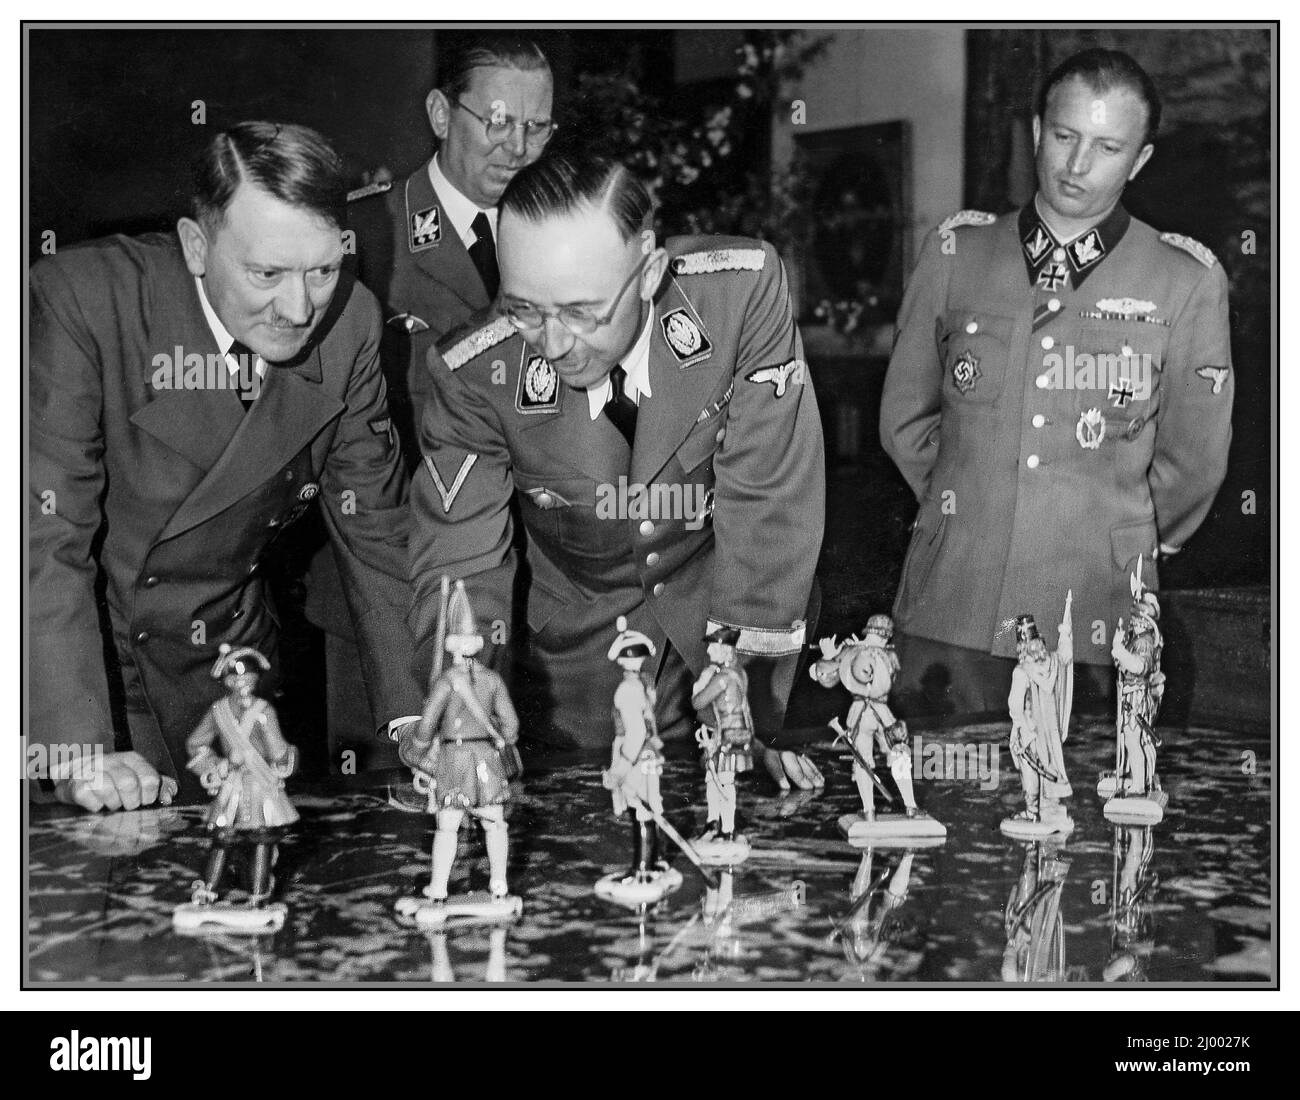 Adolf Hitler Fuhrer & Dictator of Nazi Germany and Heinrich Luitpold Himmler Reichsführer of the Schutzstaffel (Protection Squadron; SS), and a leading member of the Nazi Party (NSDAP) of Germany admire a collection of porcelain figures which have been made in detailed historic soldiers uniforms. Heinrich Hoffmann’s photograph in Obersalzberg on April 20, 1944, which Heinrich Himmler presents these Allach porcelain figures to Adolf Hitler for his 55th birthday. Allach porcelain Porzellan Manufaktur Allach was produced in Germany between 1935 and 1945. by forced Dachau concentration camp labour Stock Photo